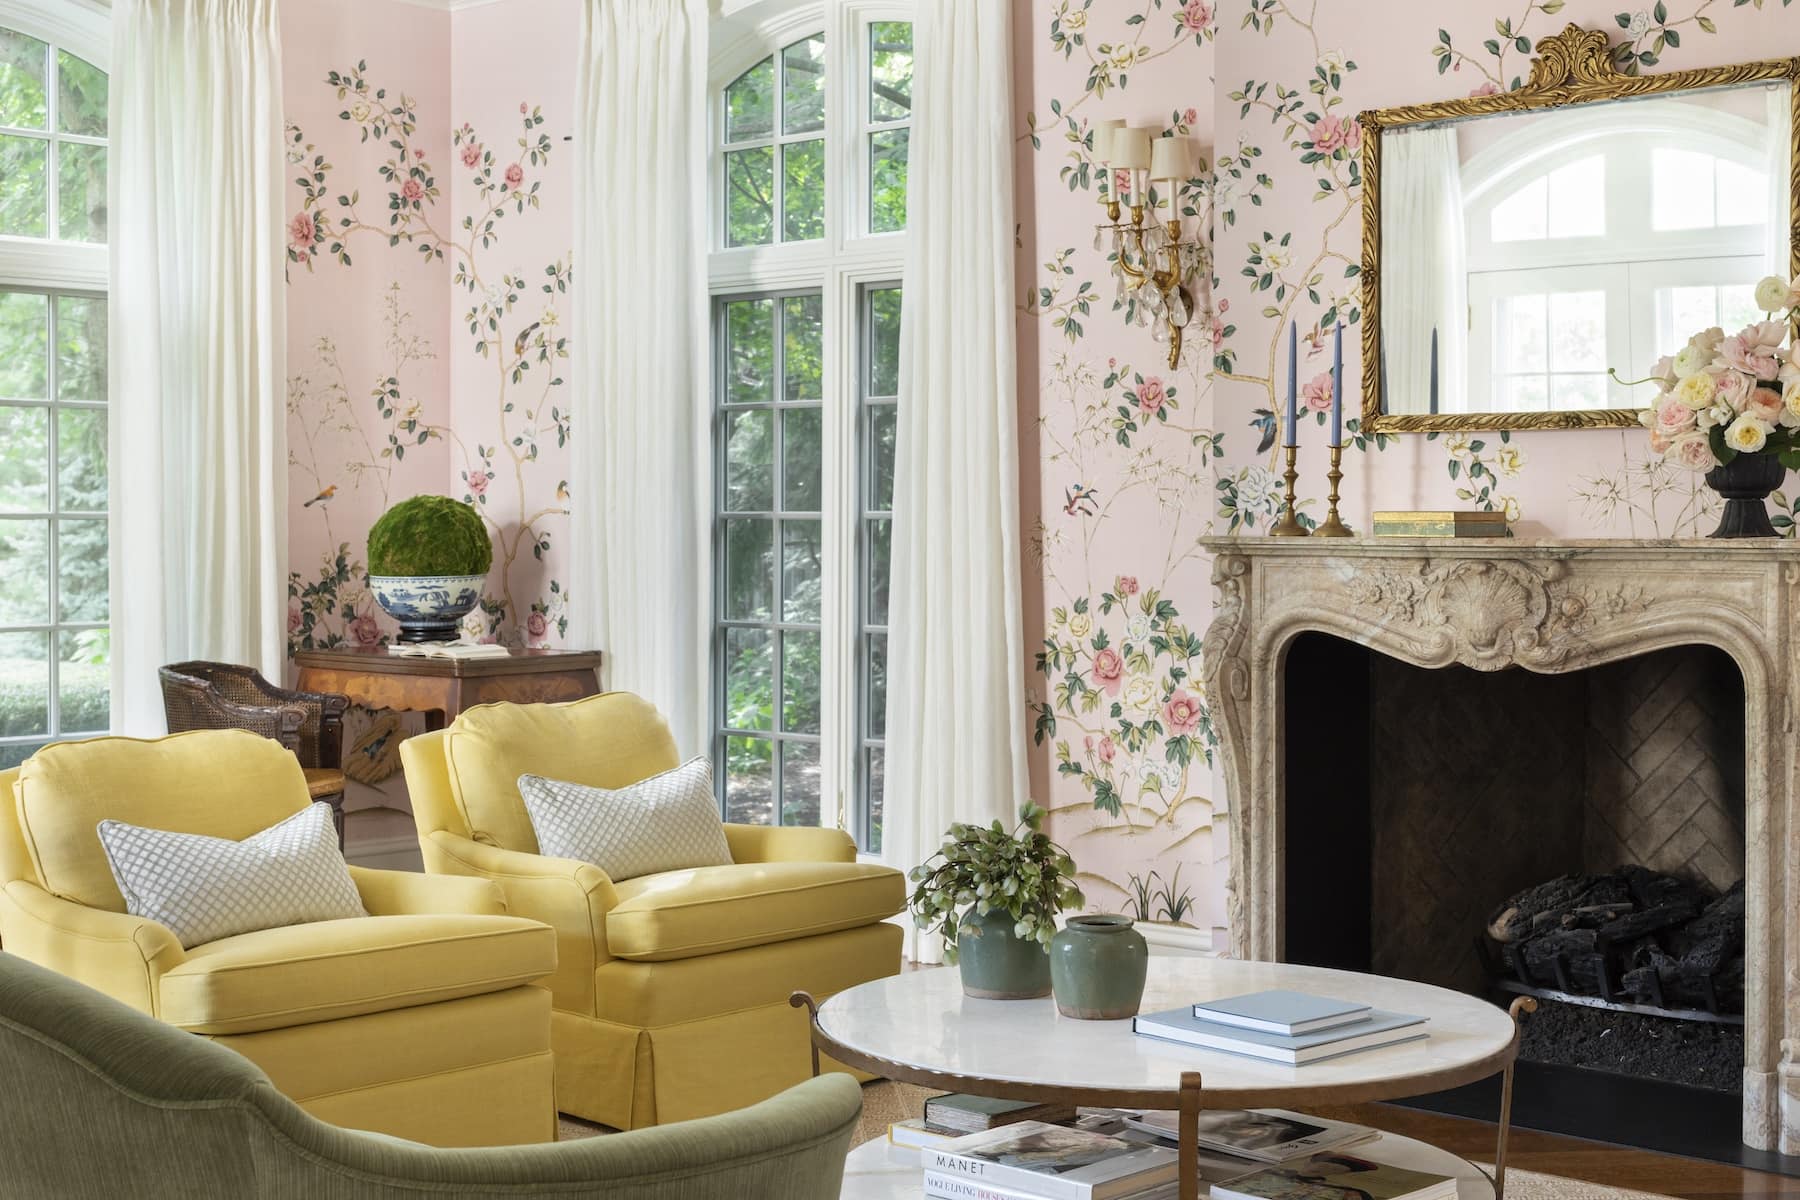 Fresh young design with romantic living room by Alexandra Kaehler.